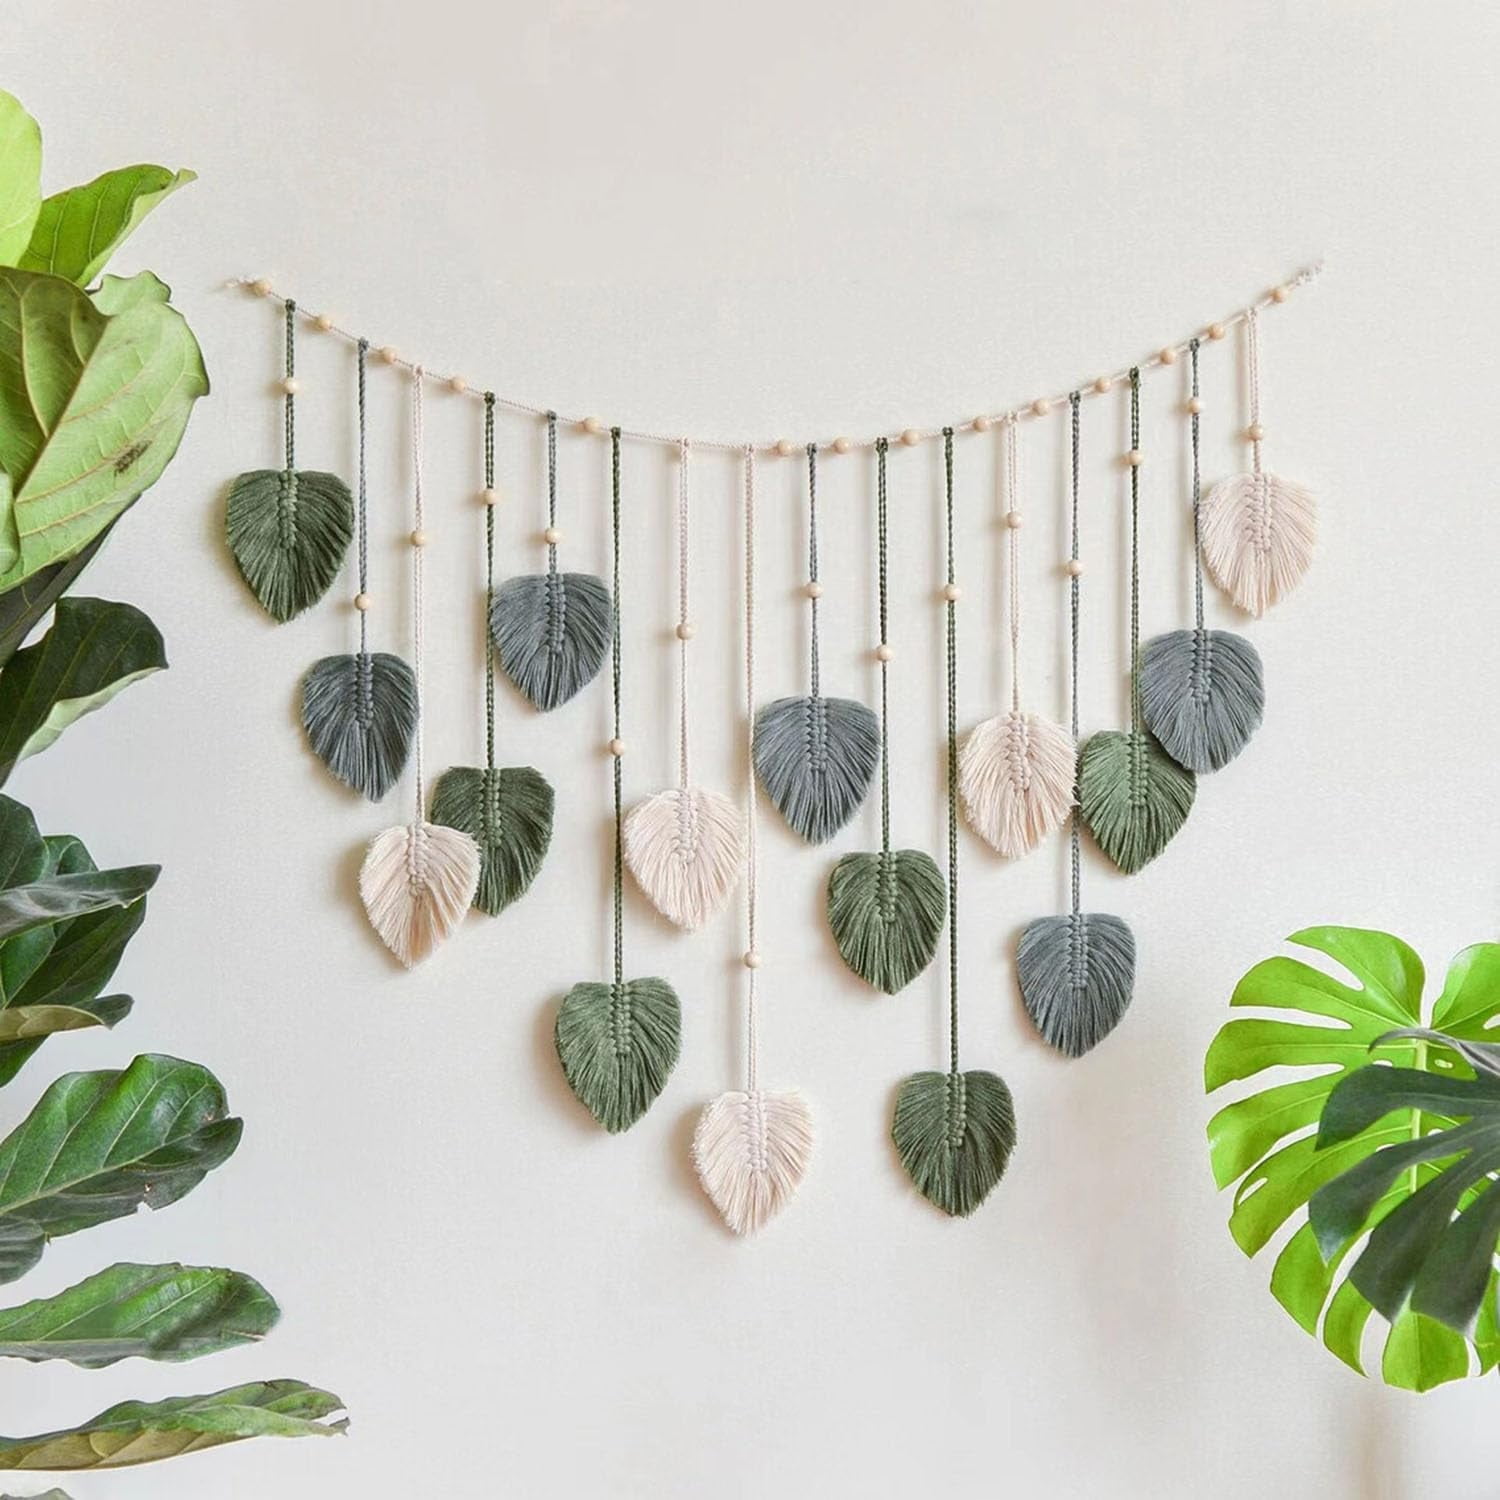 Macrame Wall Hanging Tapestry,REFAHB Leaf-Feather Wall Hangers,Tassel  Tapestry Boho Chic Wall Decor Handmade Woven Ornament (29.5 x 47.3 inch) 